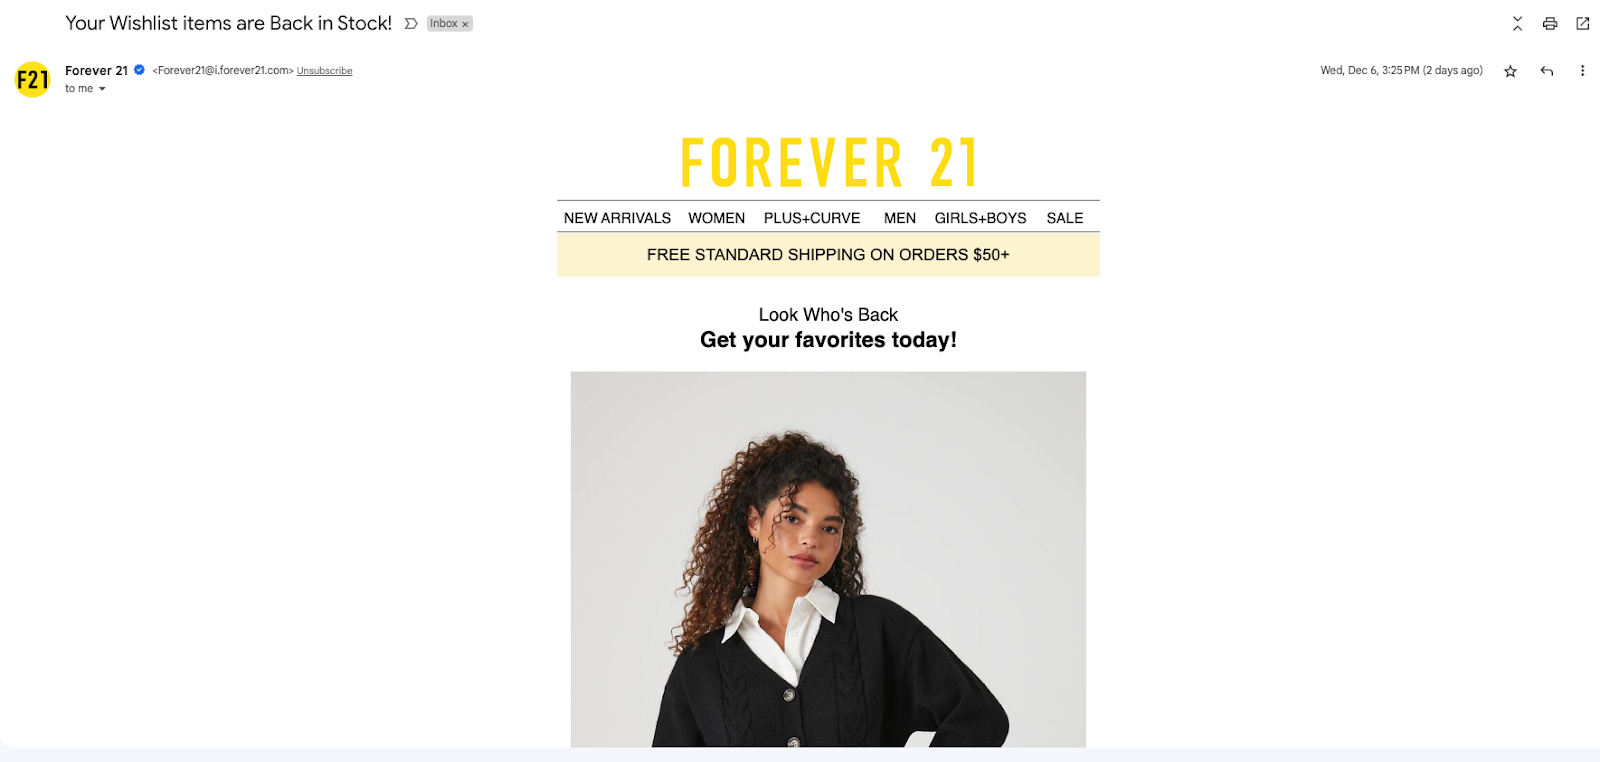 Forever 21 automated wishlist reminder email 